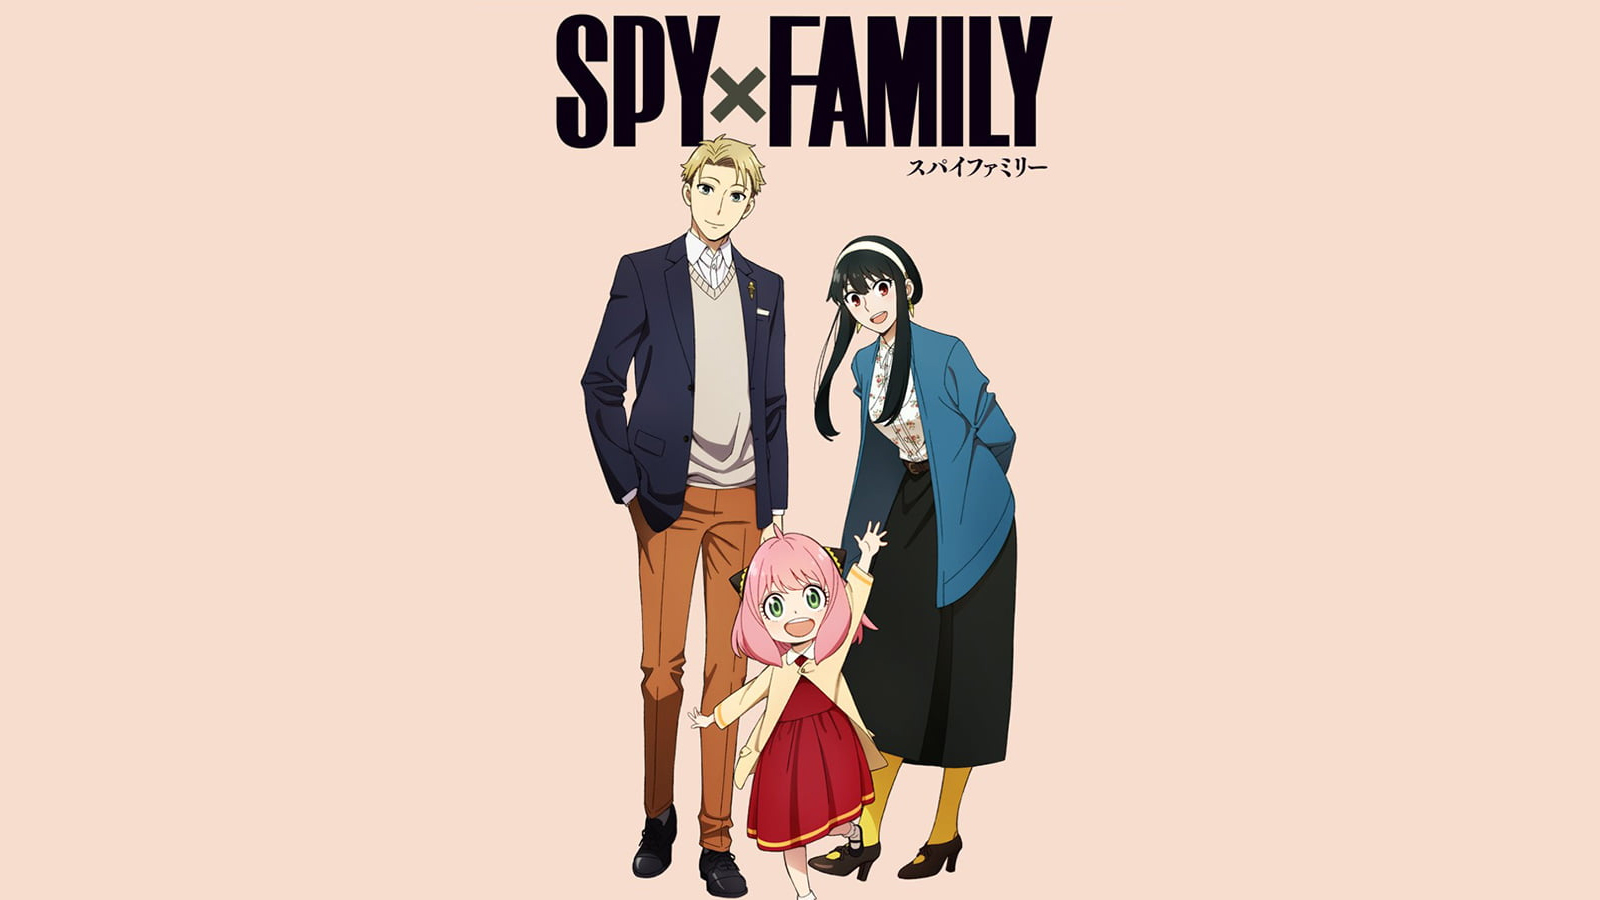 Spy x Family” Episode 3 Release Date & Time: Where To Watch It Online?